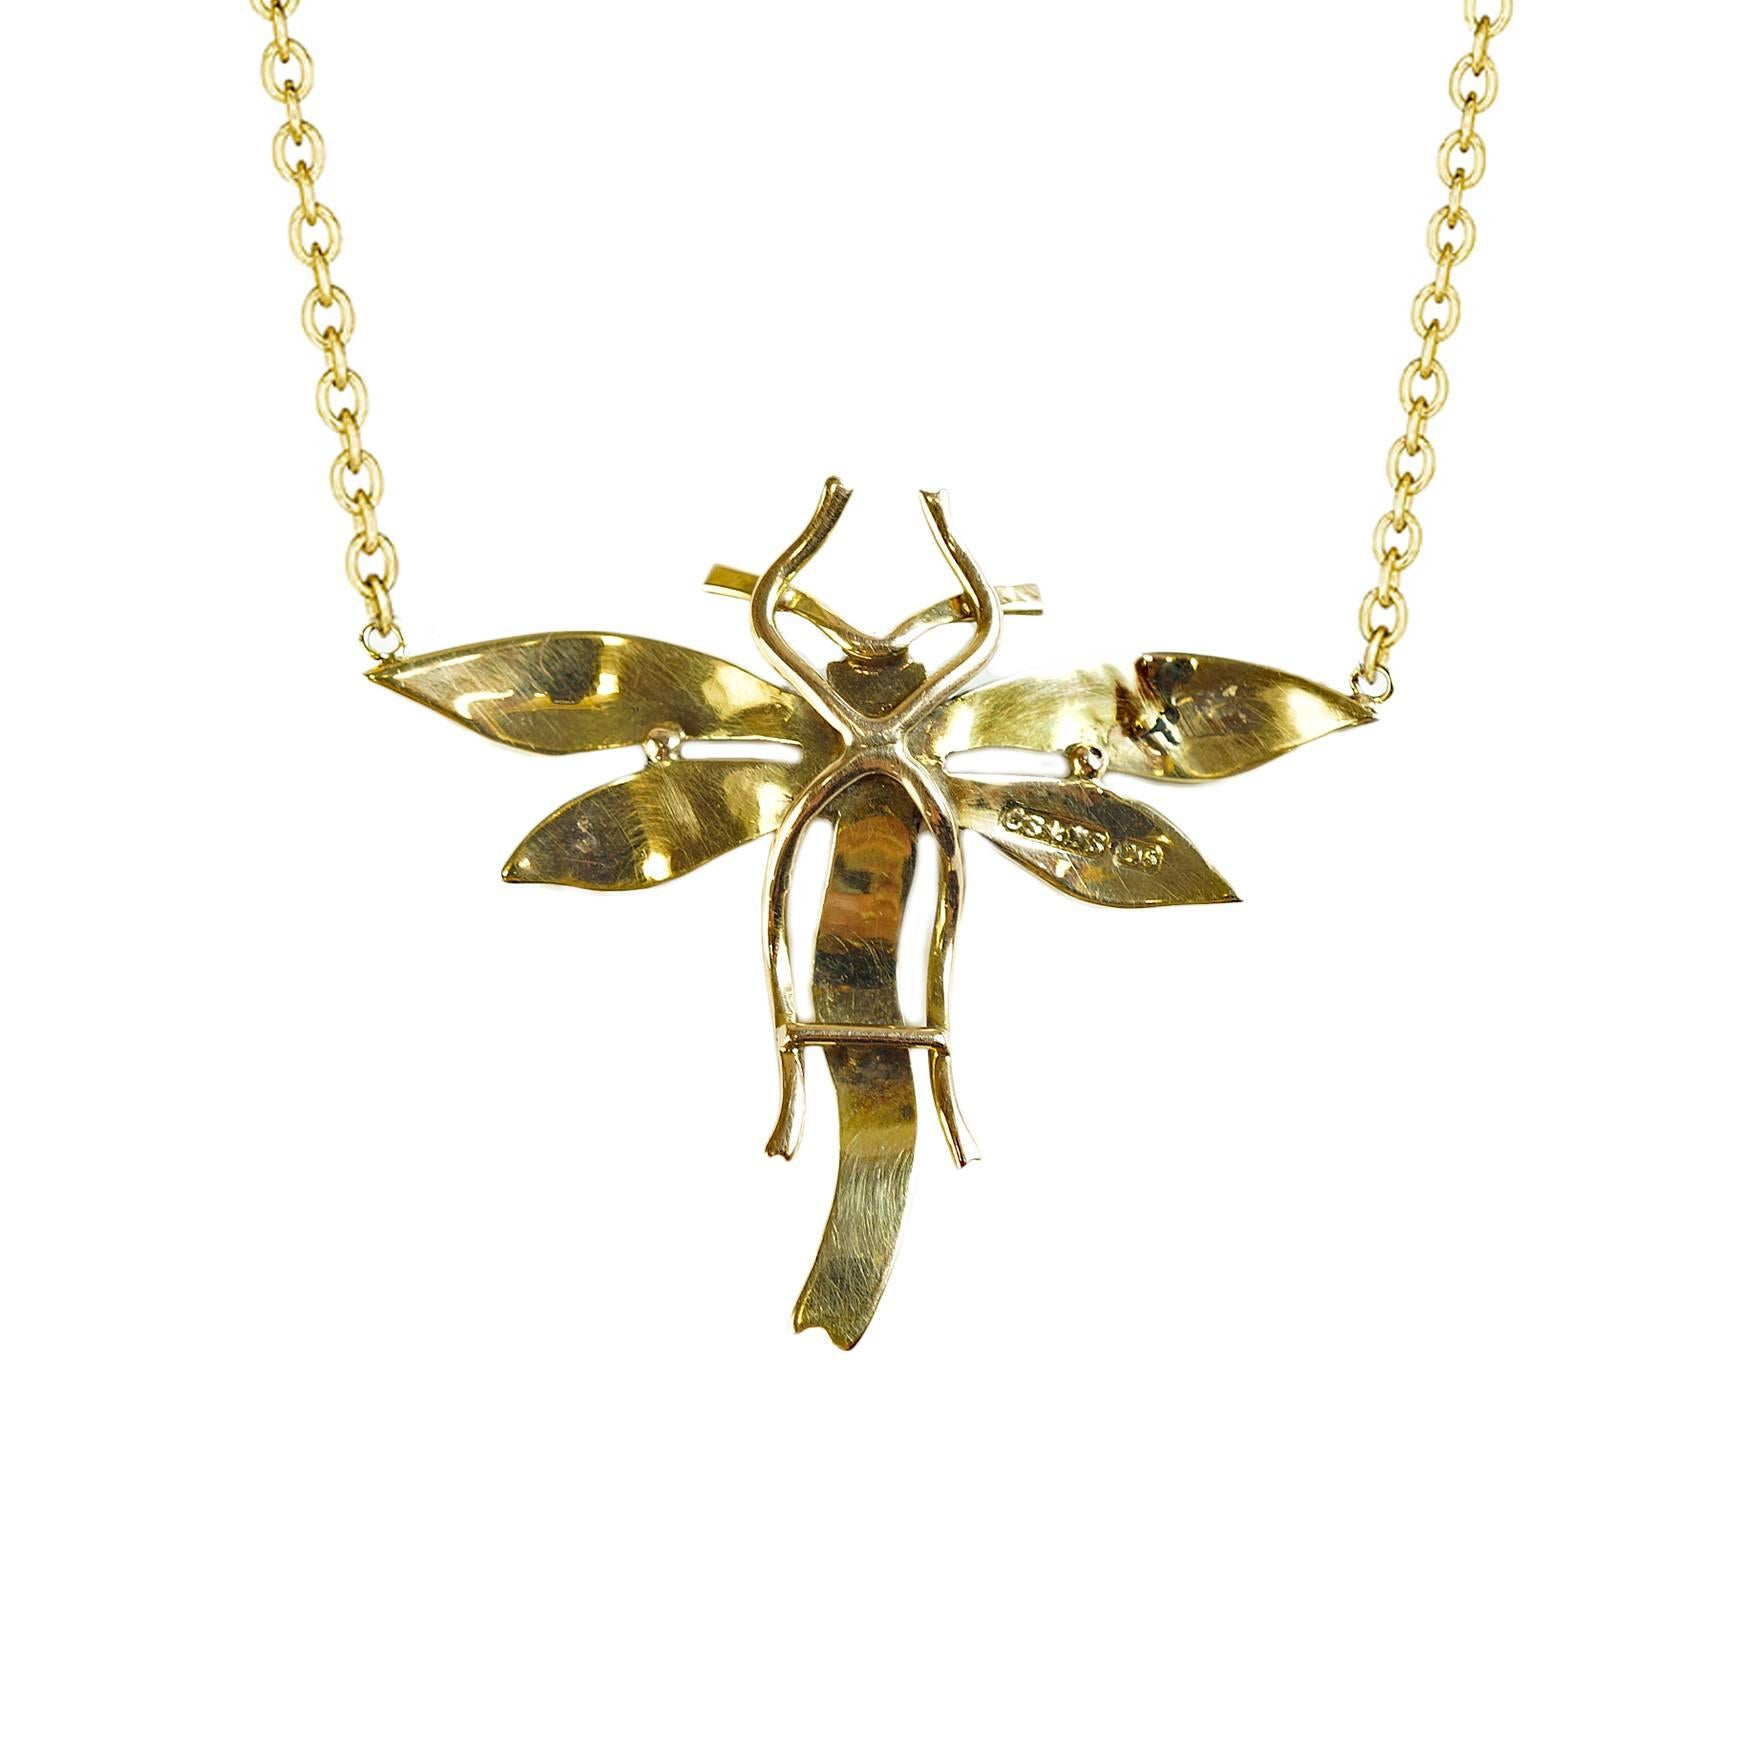 Edwardian seed pearl dragonfly necklace with a diamond center.  English 15 kt yellow gold connected to a 18" 18 kt yellow gold cable chain. 